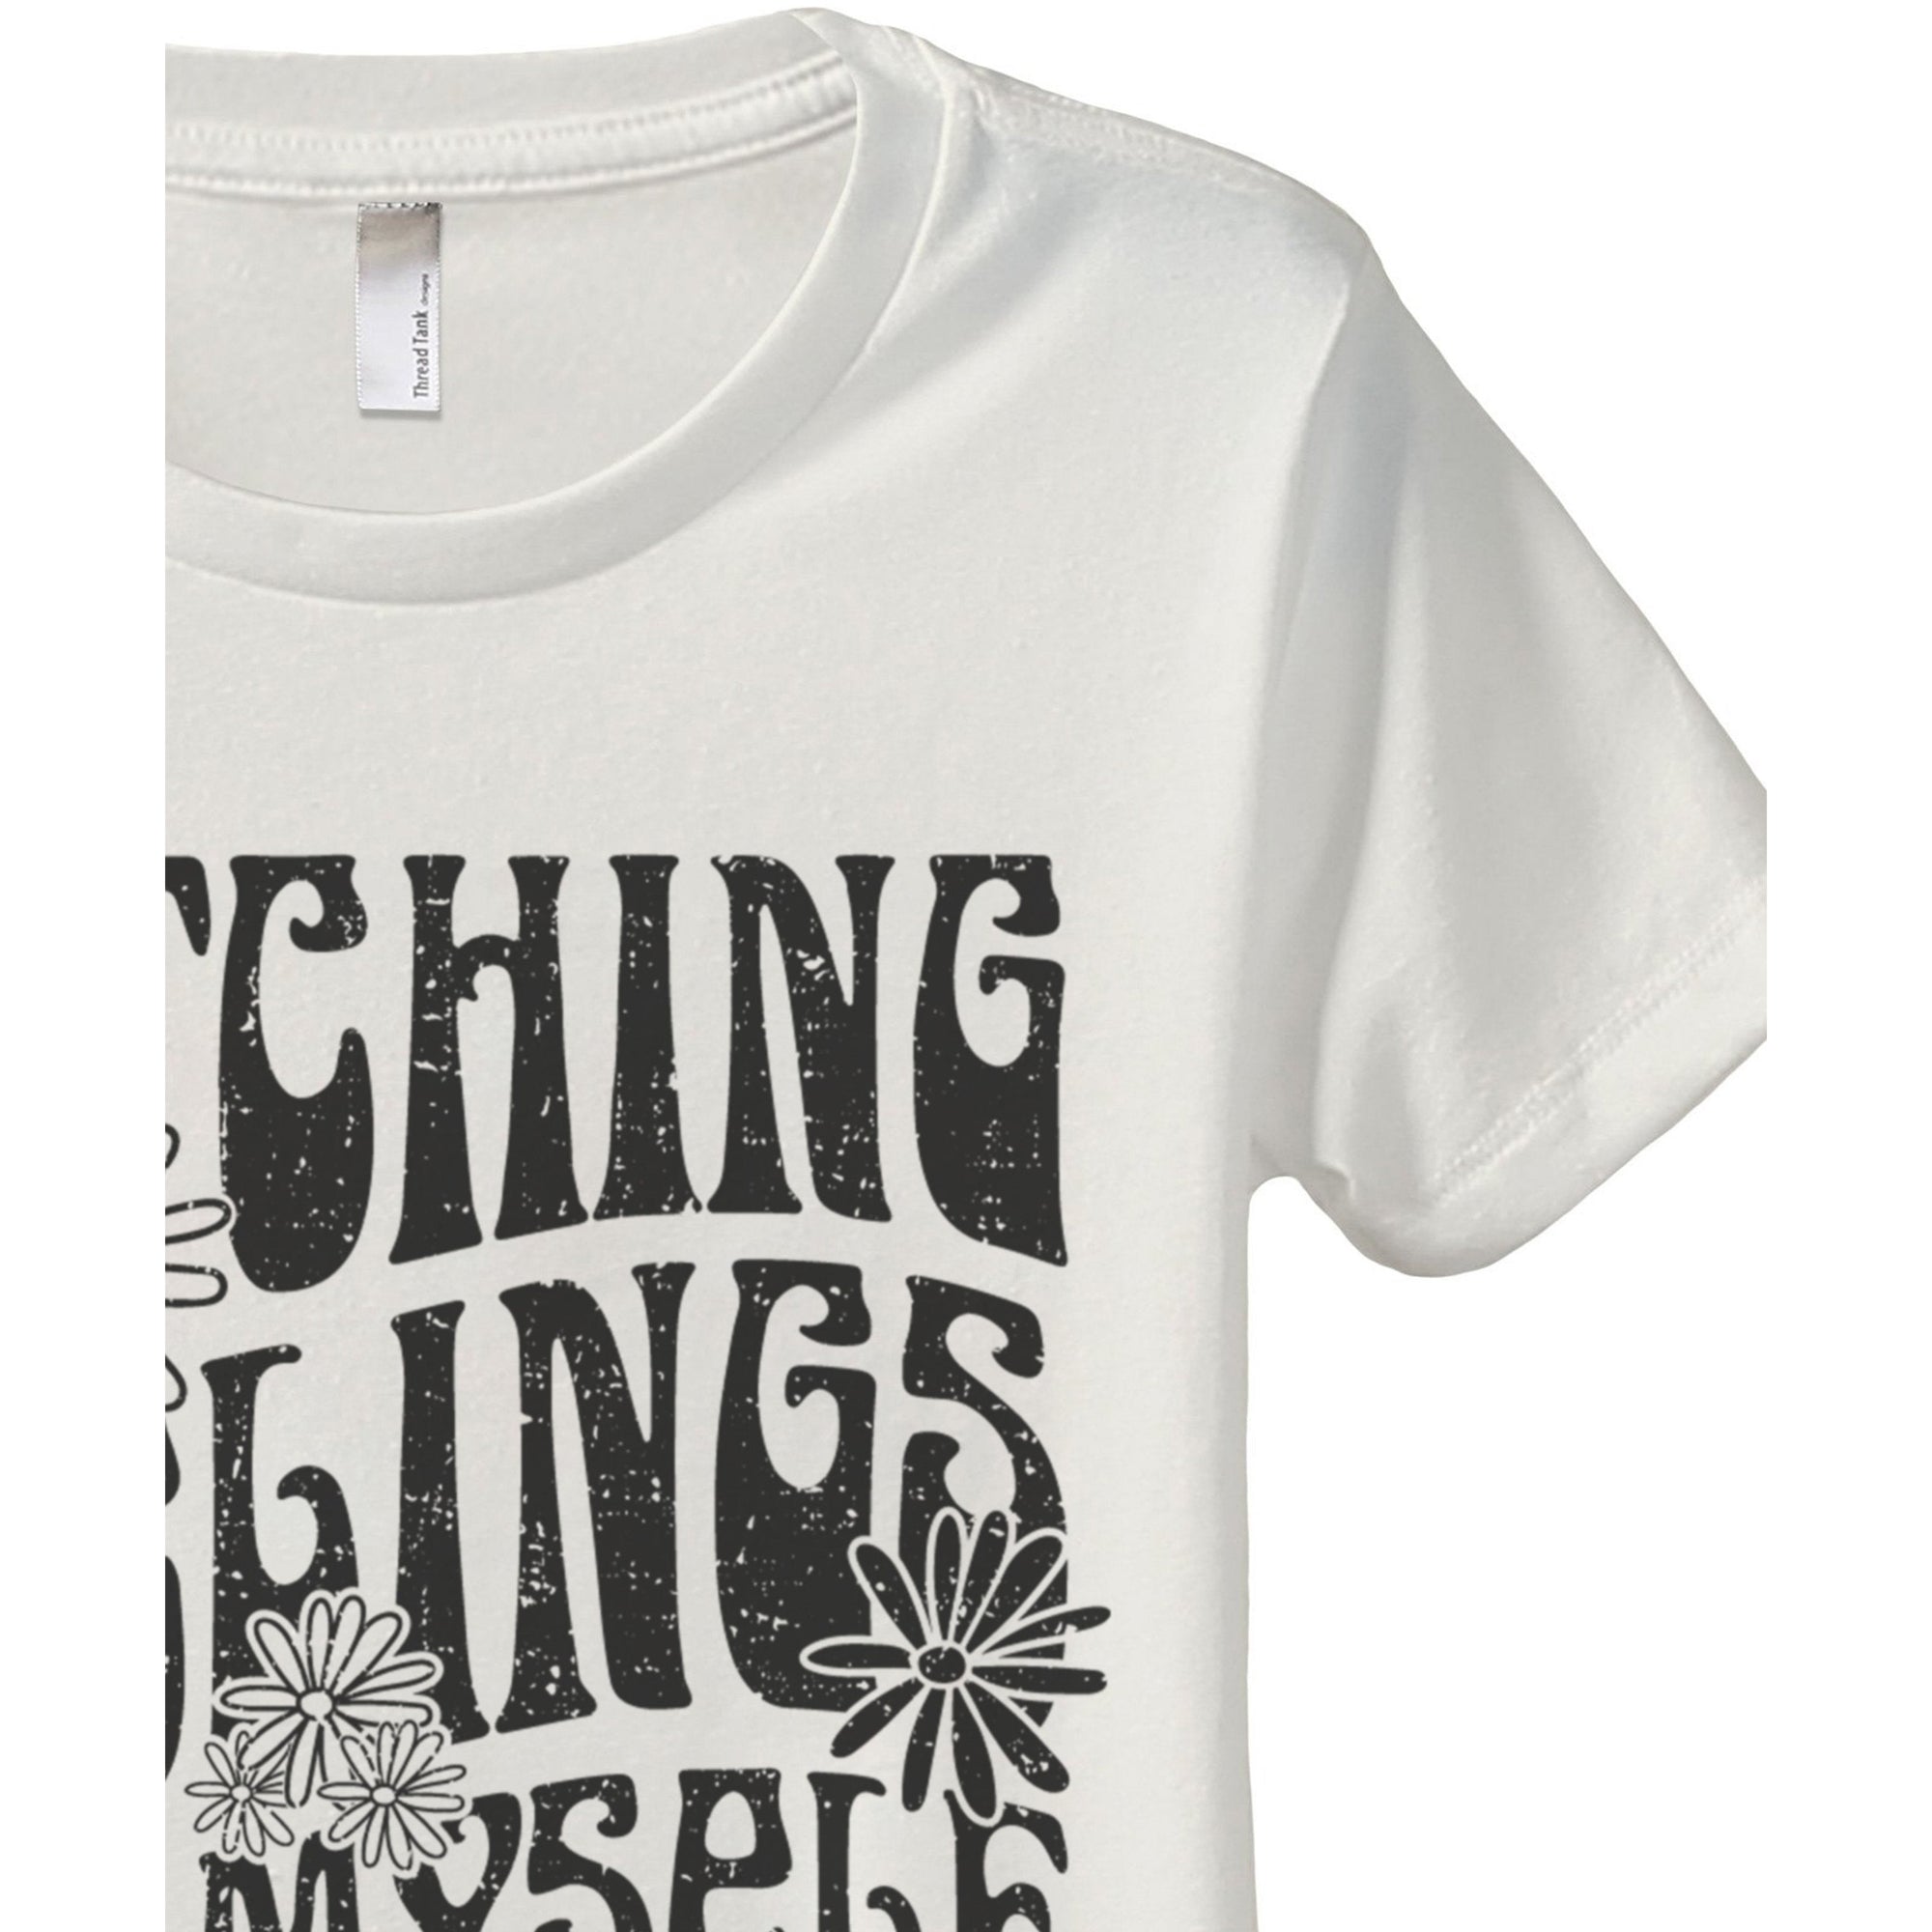 Catching Feelings For Myself Women's Relaxed Crewneck T-Shirt Top Tee Vintage White